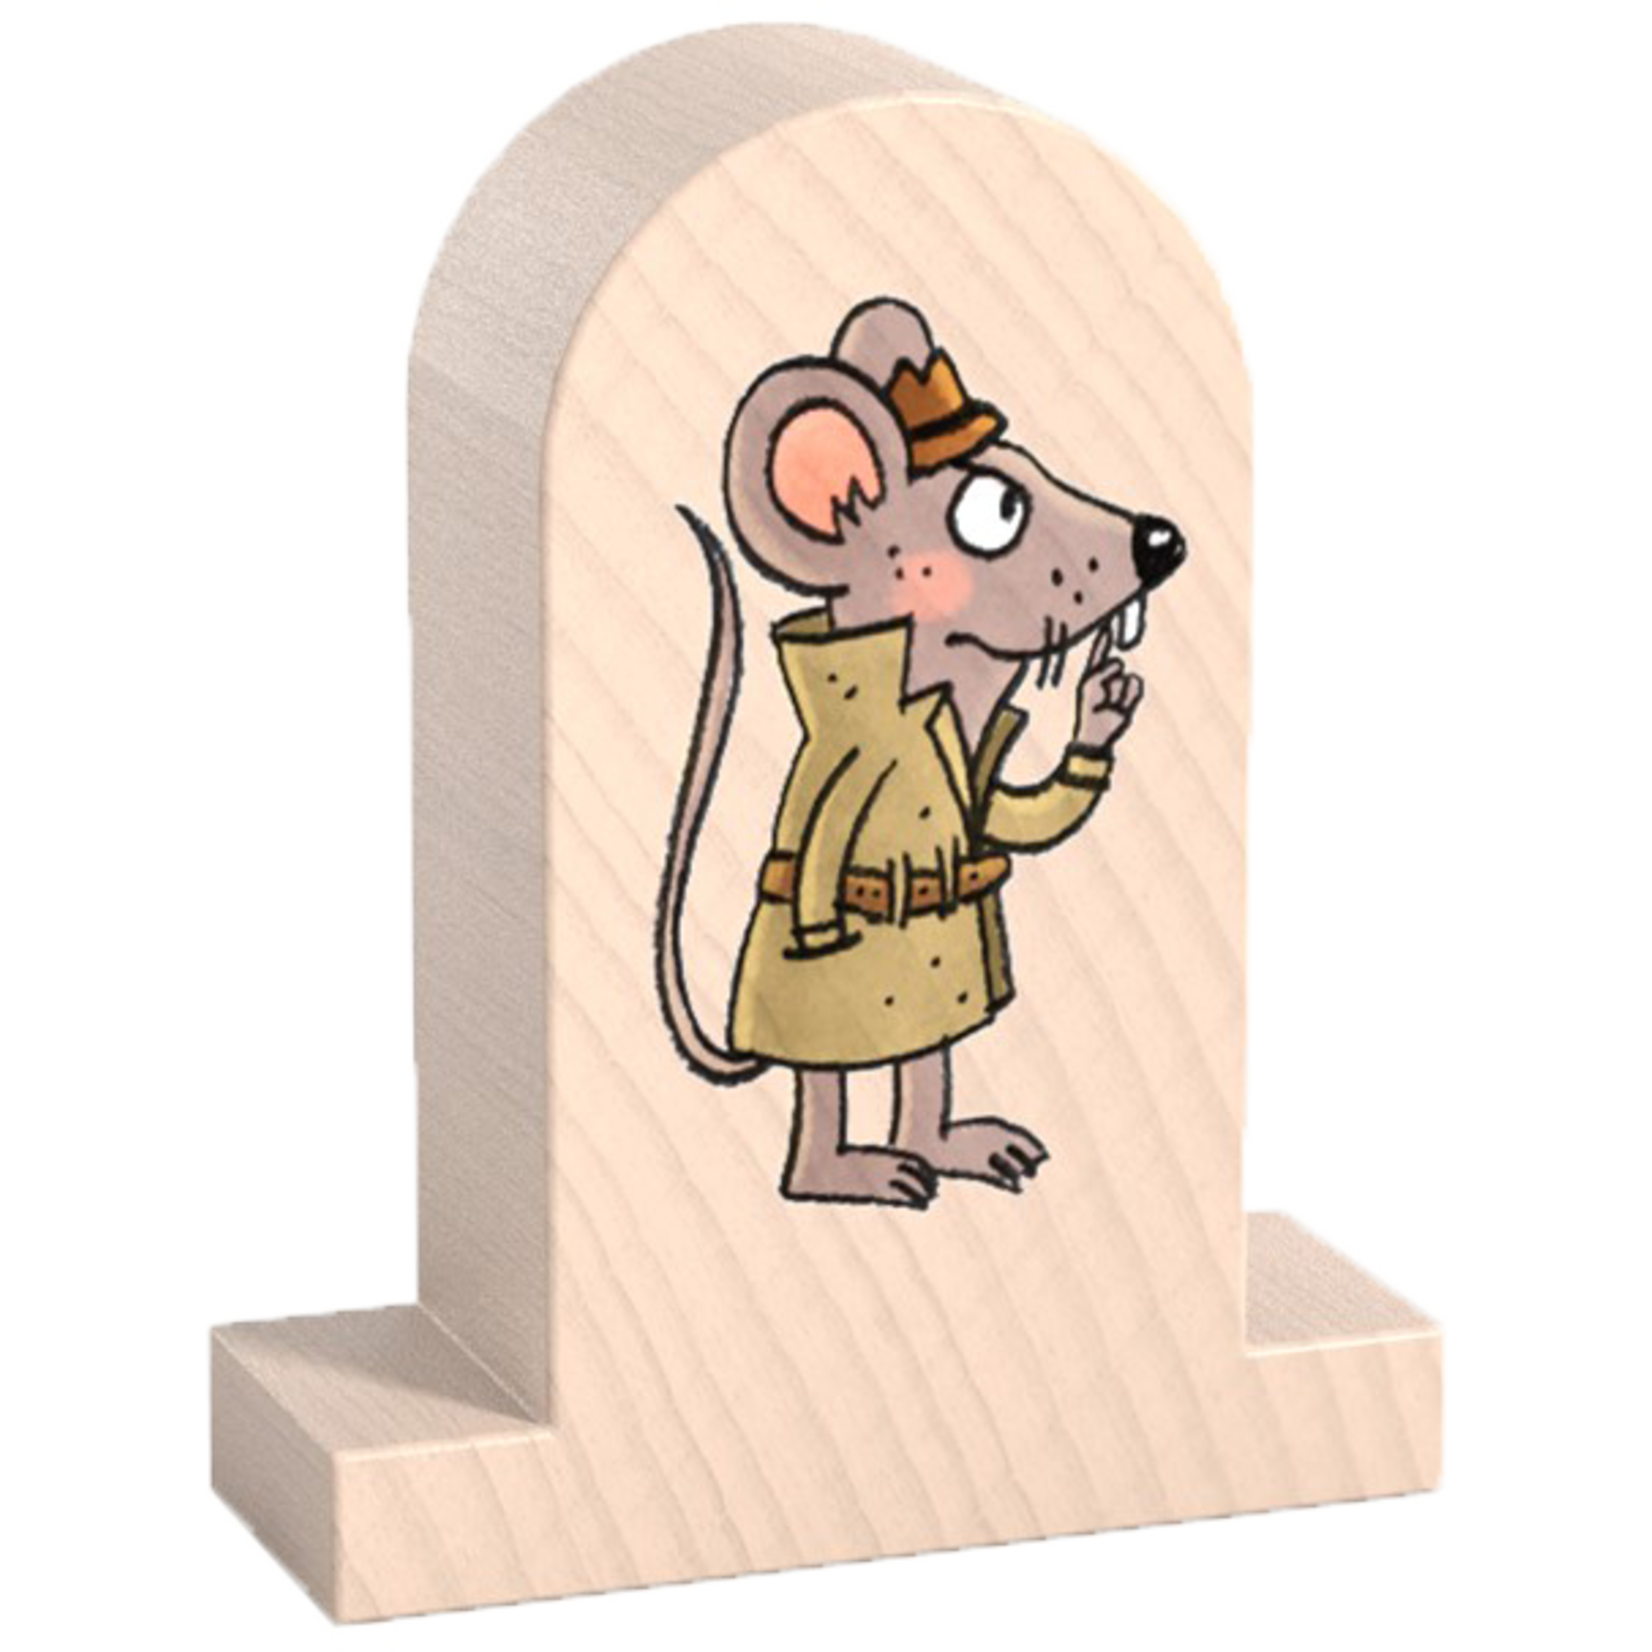 Haba Inspector Mouse: The Great Escape